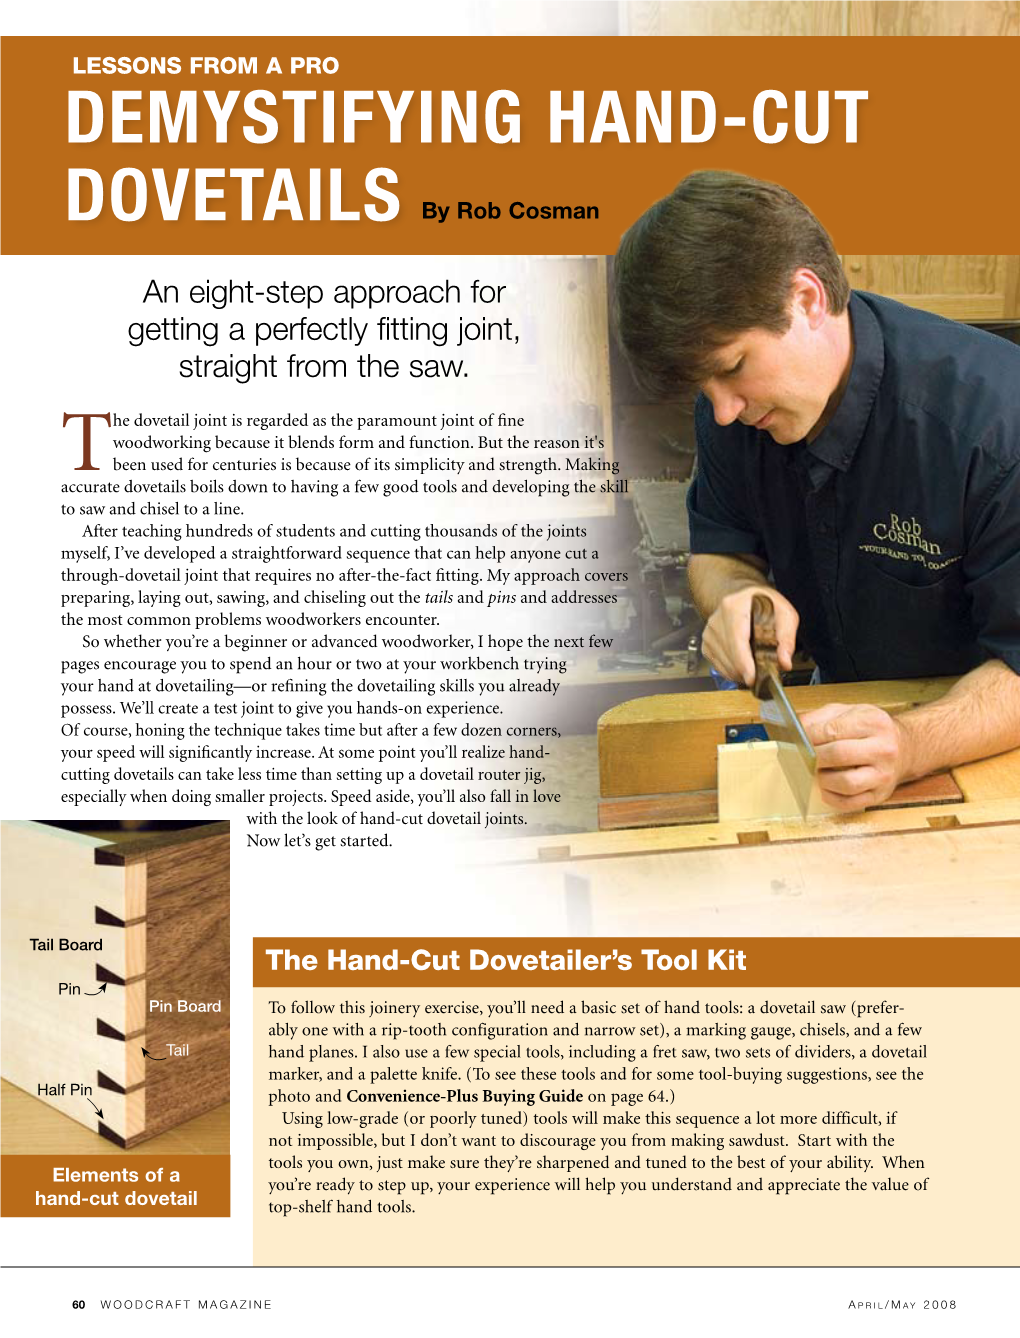 DEMYSTIFYING HAND-CUT DOVETAILS by Rob